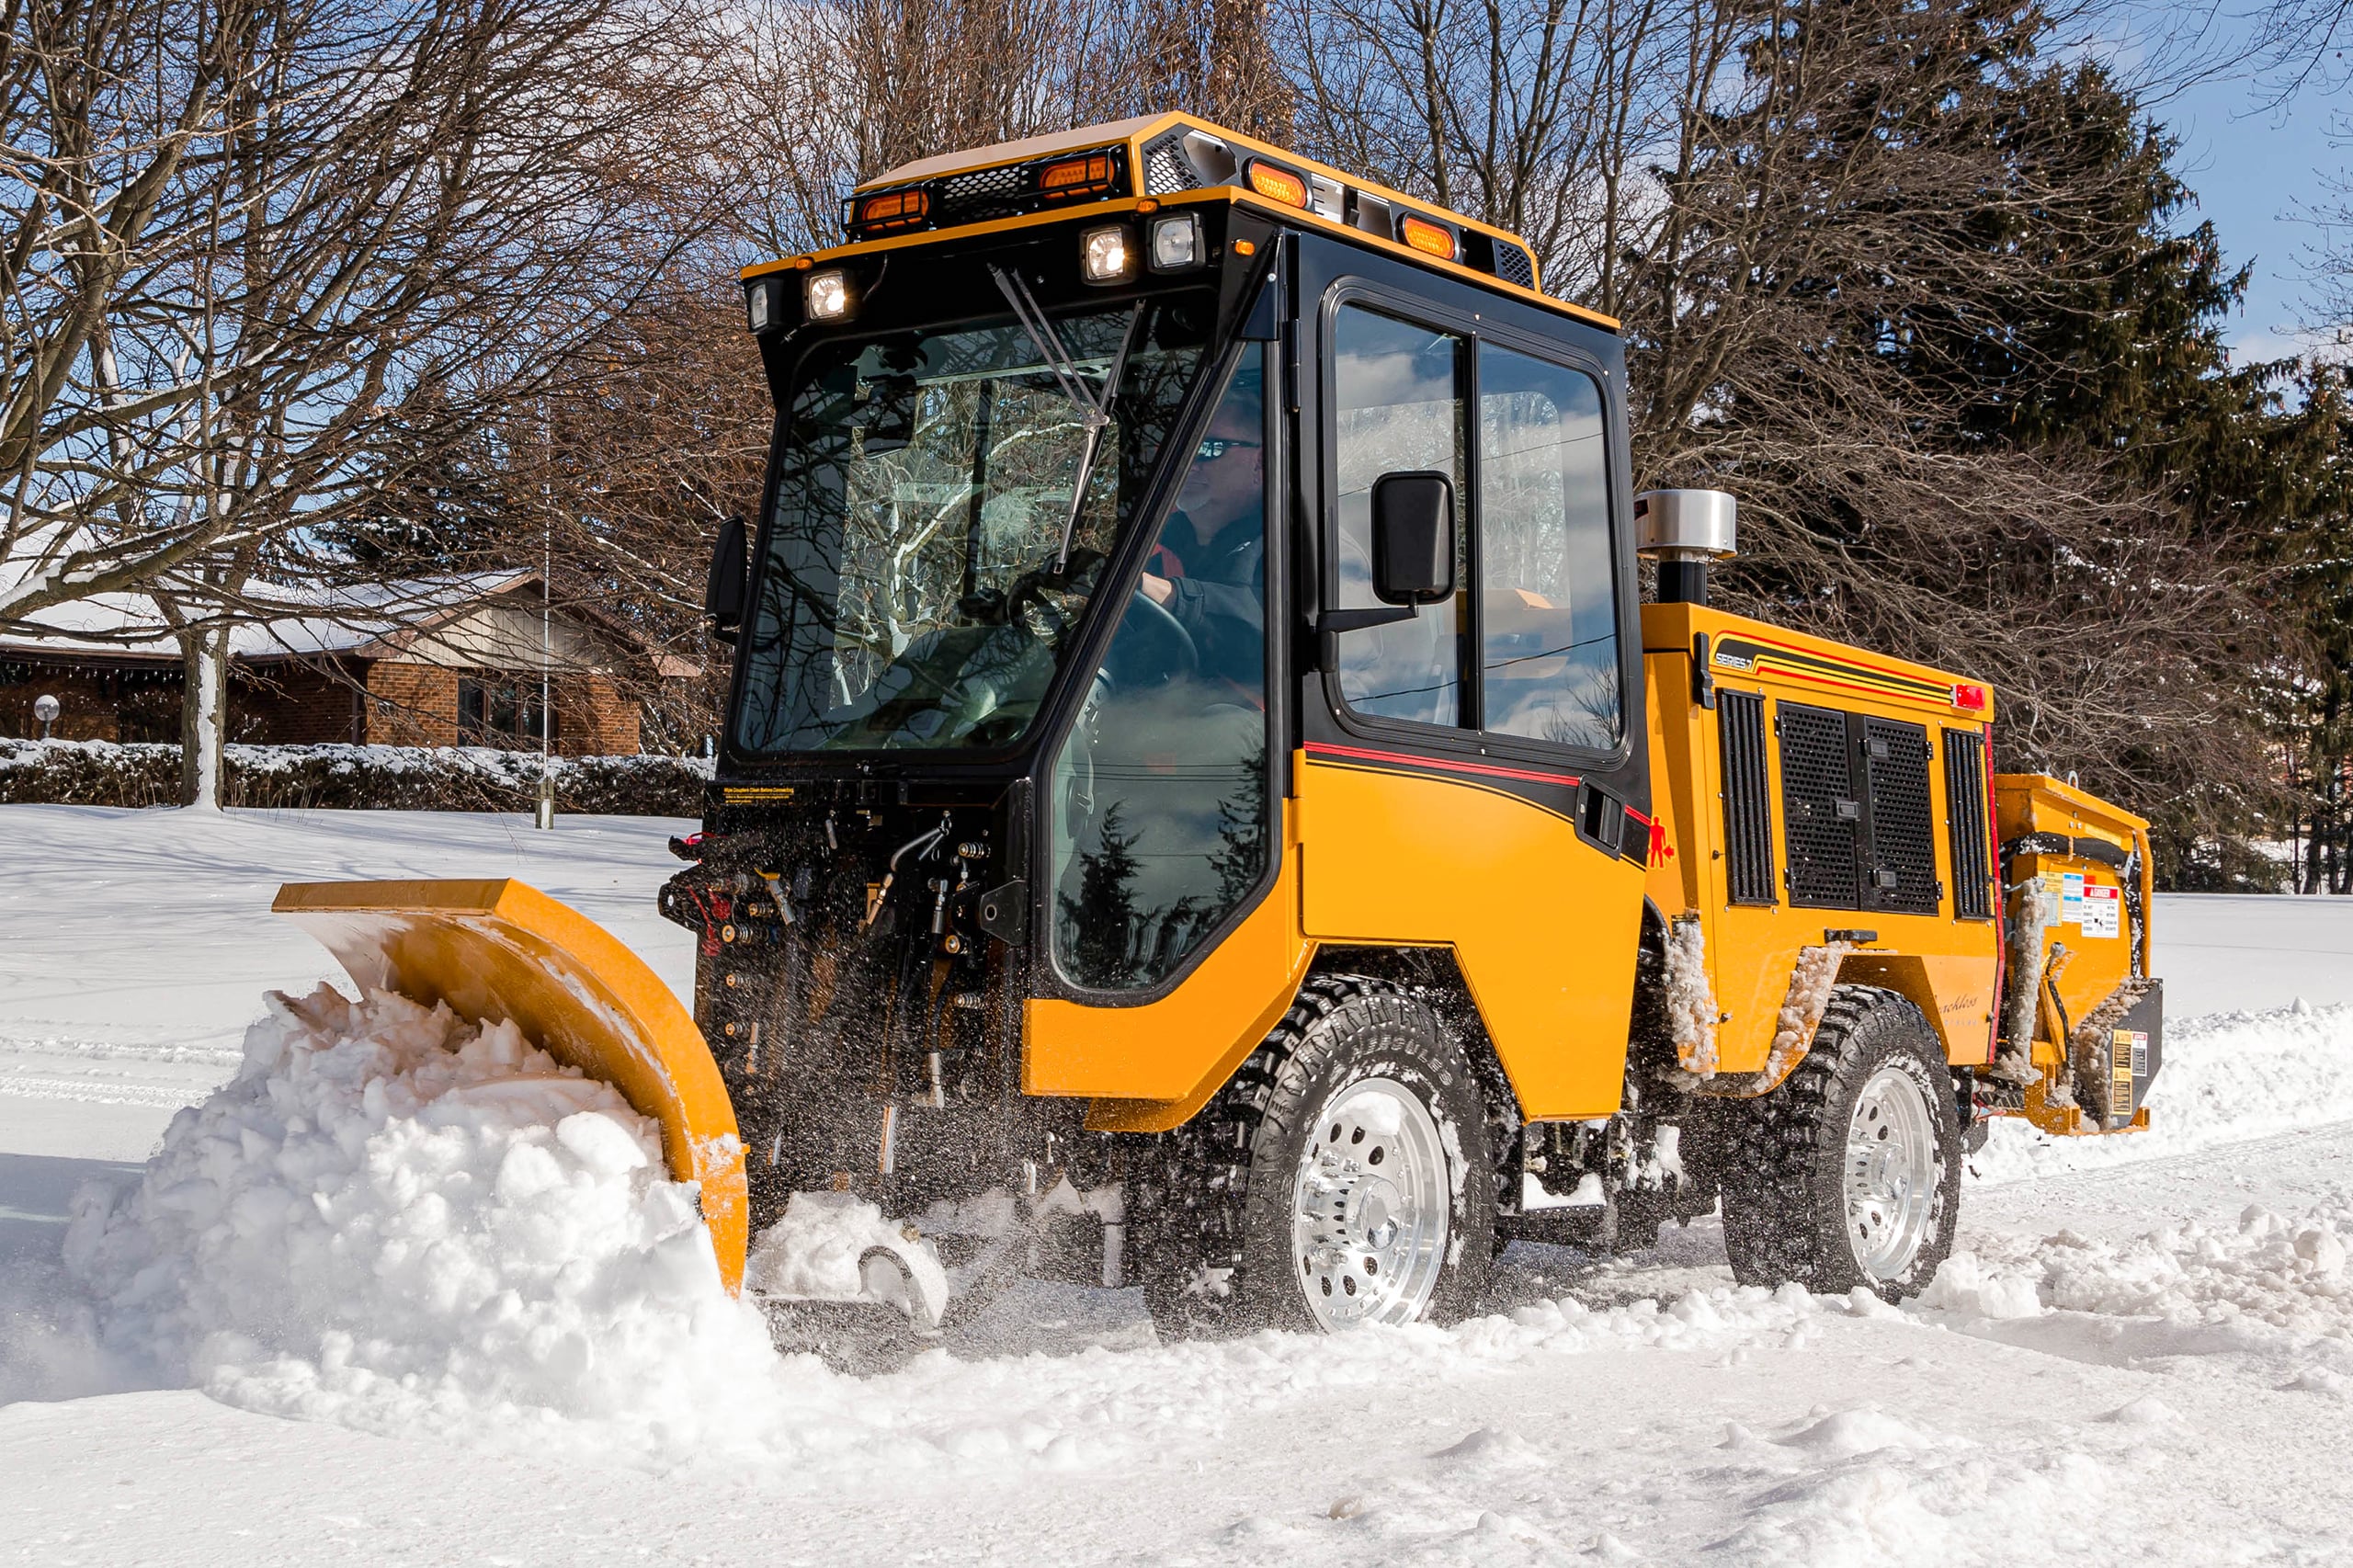 trackless vehicles double trip plow attachment on sidewalk municipal tractor